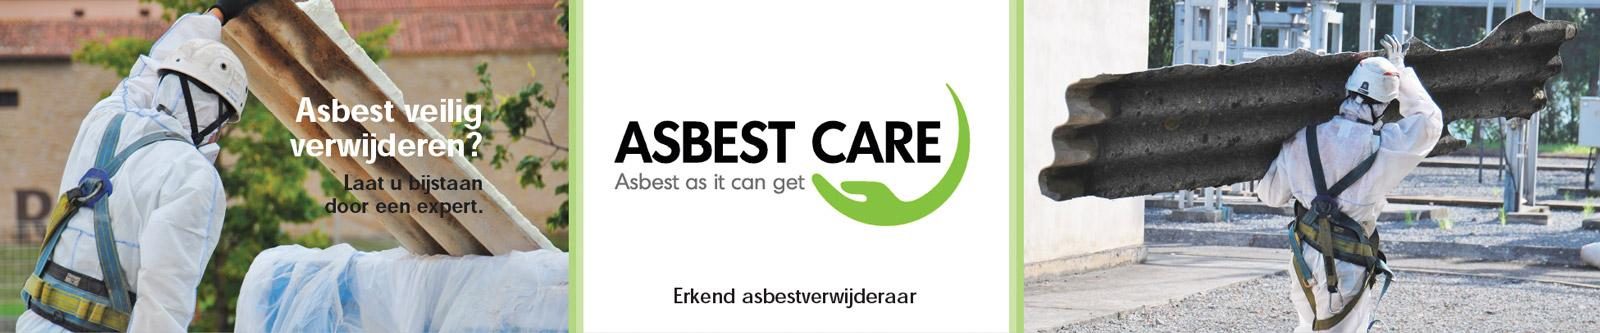 Asbest Care